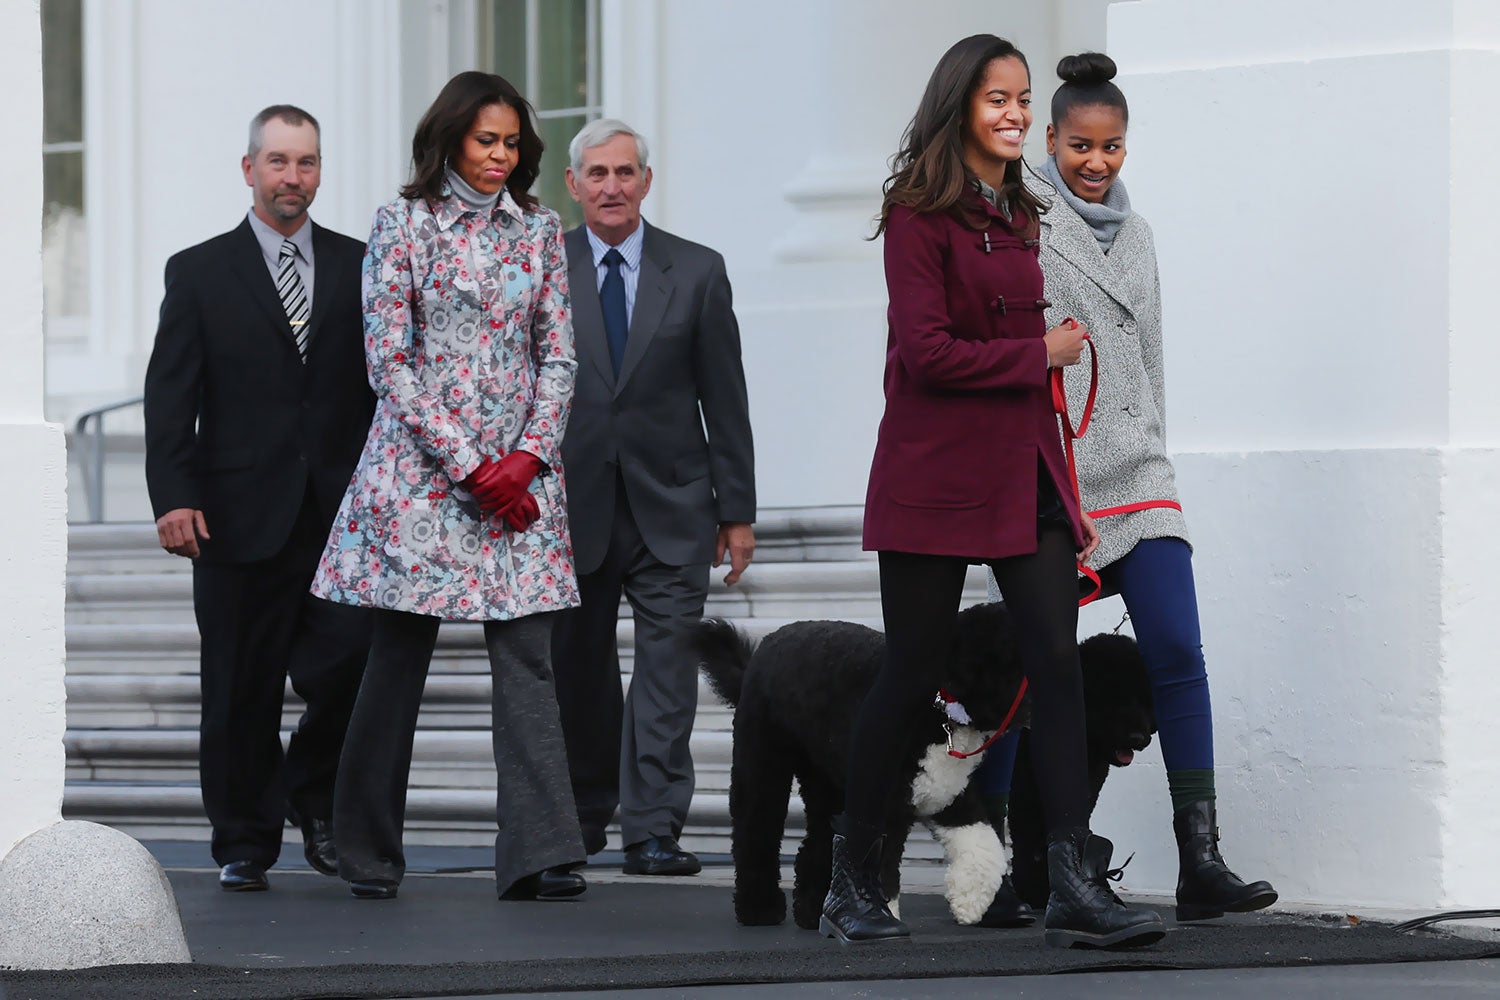 Spotted: Malia and Michelle Obama Touring NYC Colleges
